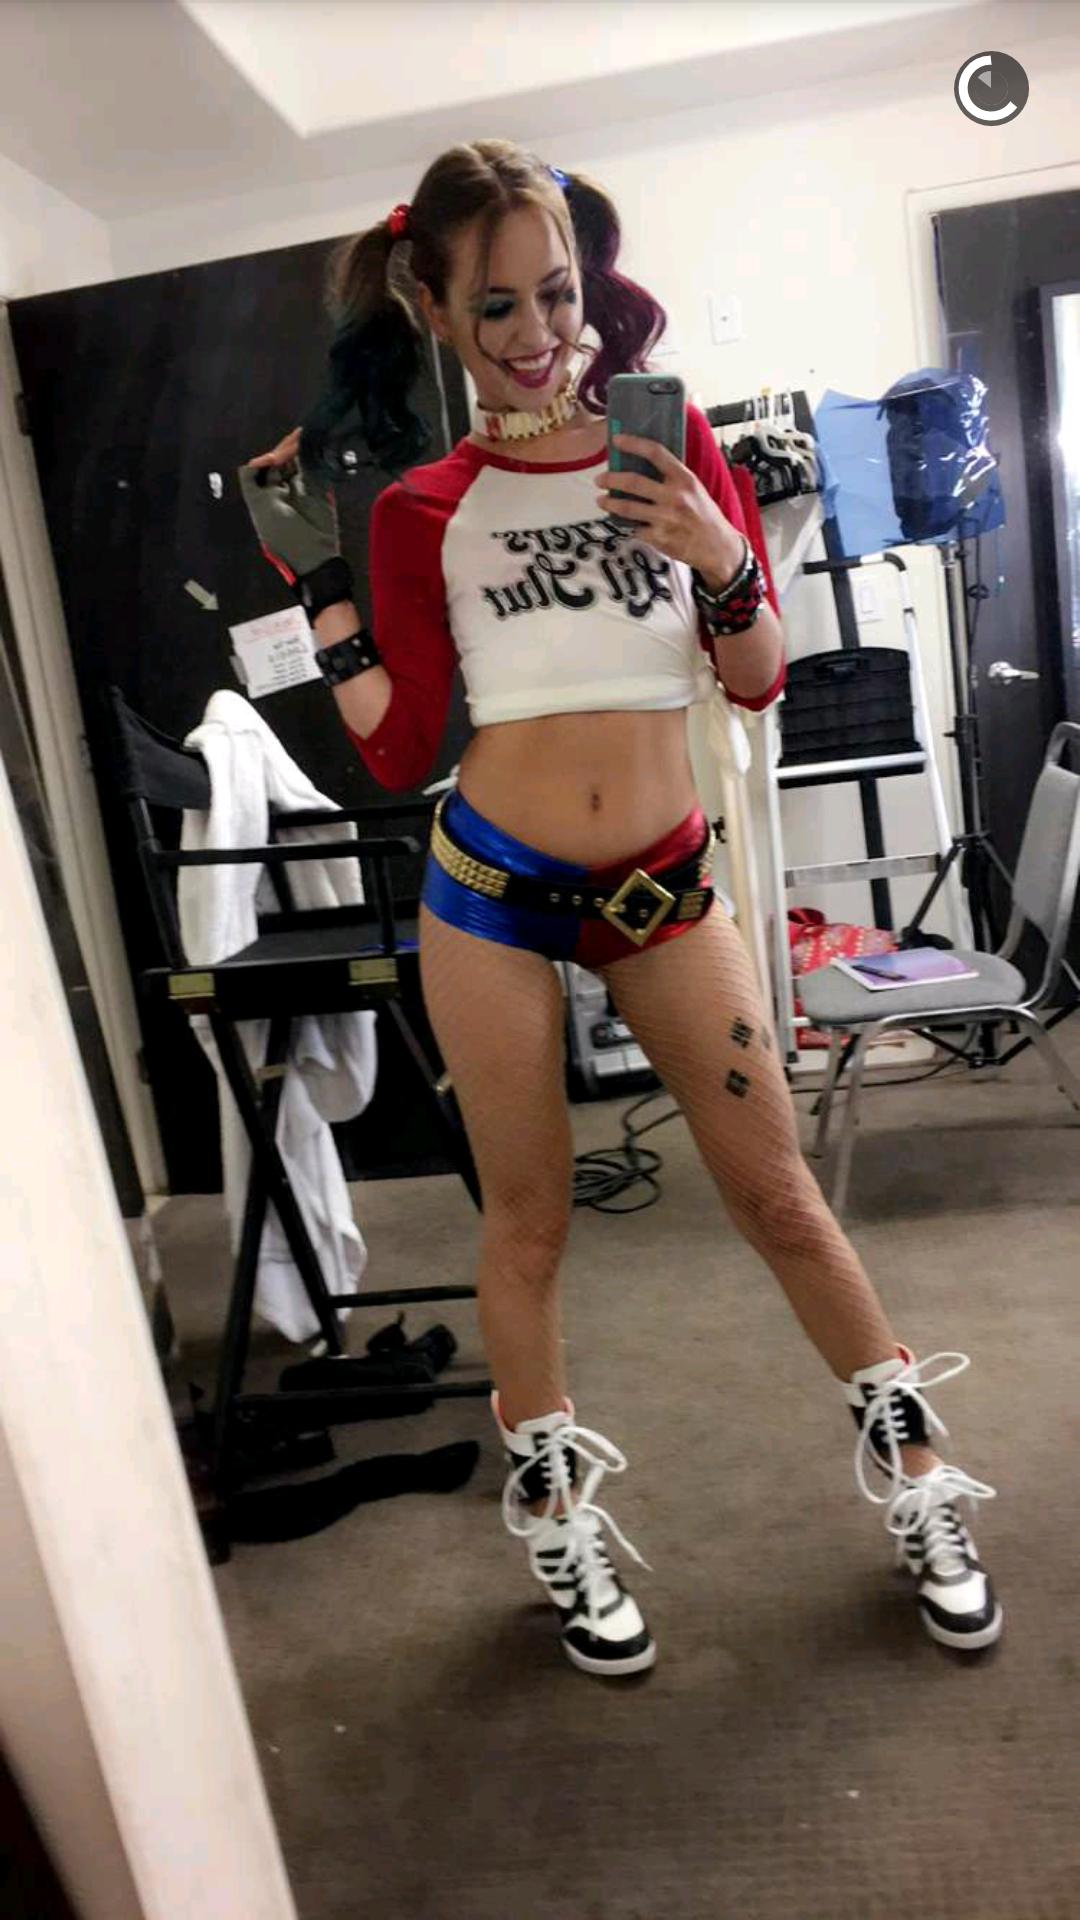 1080px x 1920px - Brazzers Release Suicide Squad Parody Trailers - FreeOnes Blog: Pornstars -  Models - Porn Site Reviews - Sex Videos - Behind the Scenes and more!